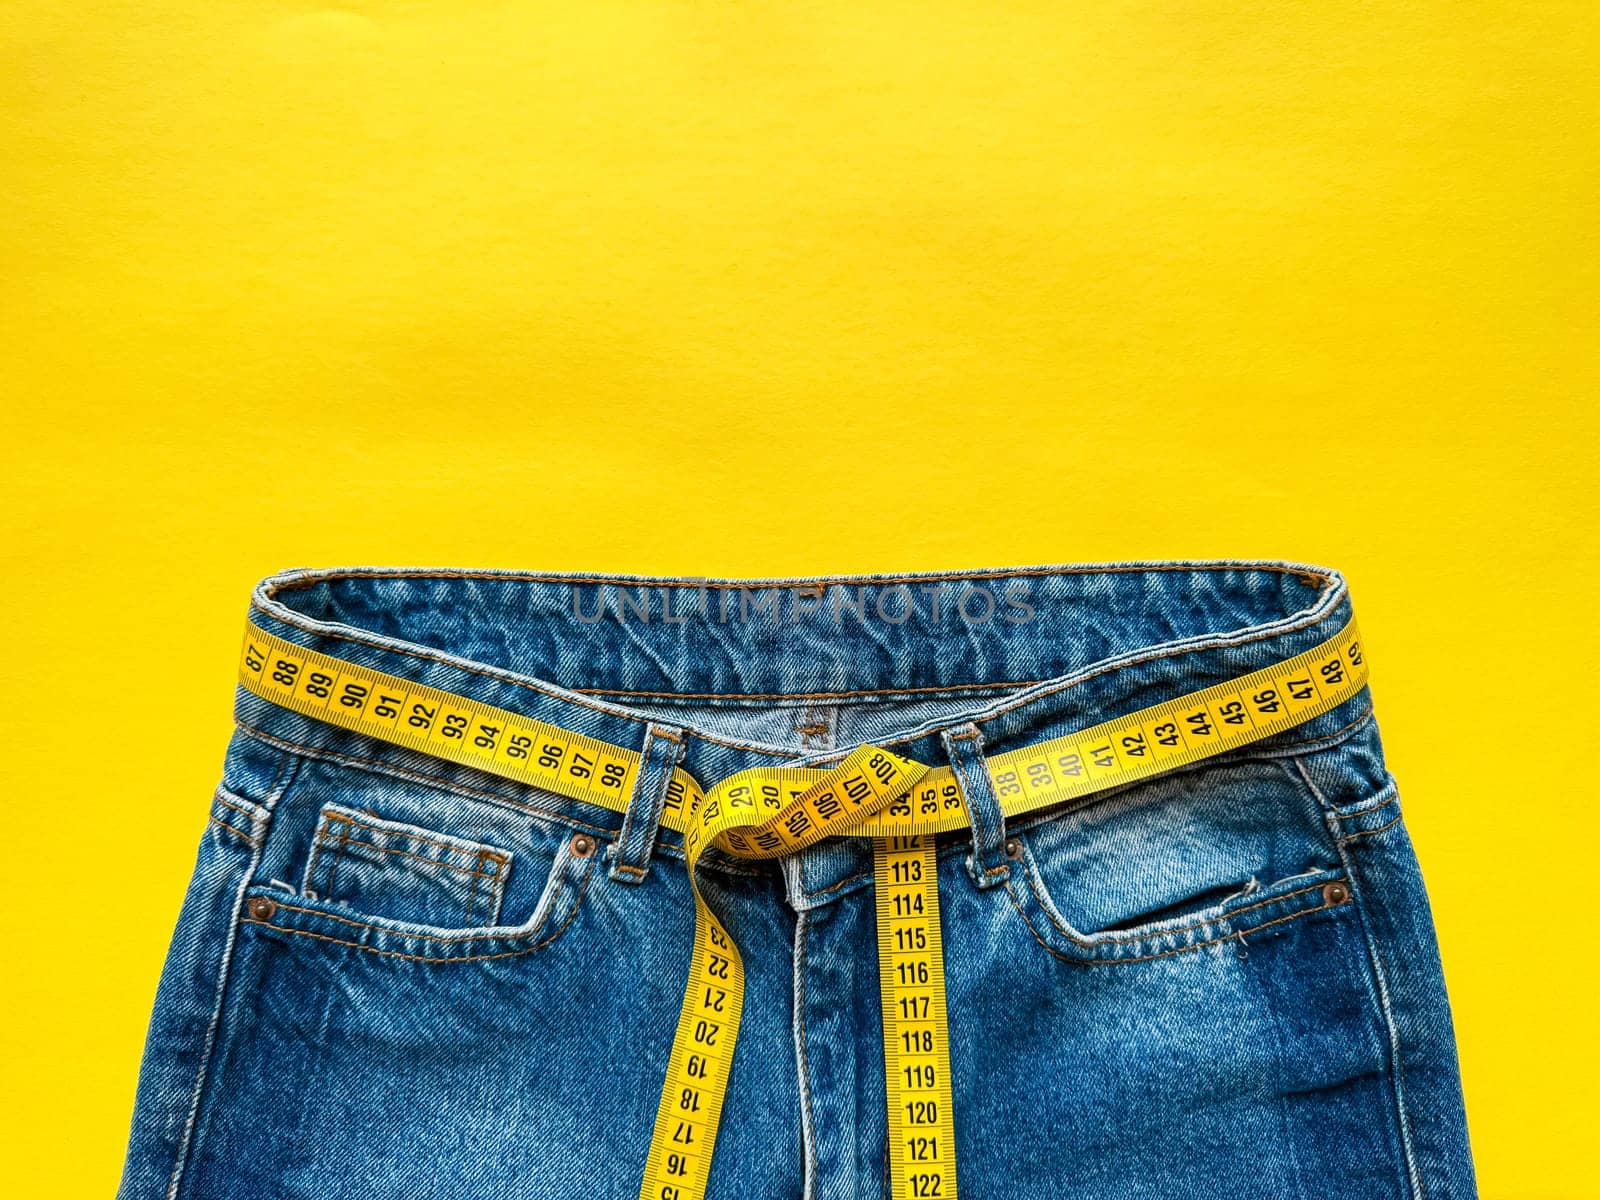 Blue jeans with measuring tape as belt on bright yellow background with copy space. Depicting weight loss, diet, and healthy lifestyle concept. Top view. by Lunnica